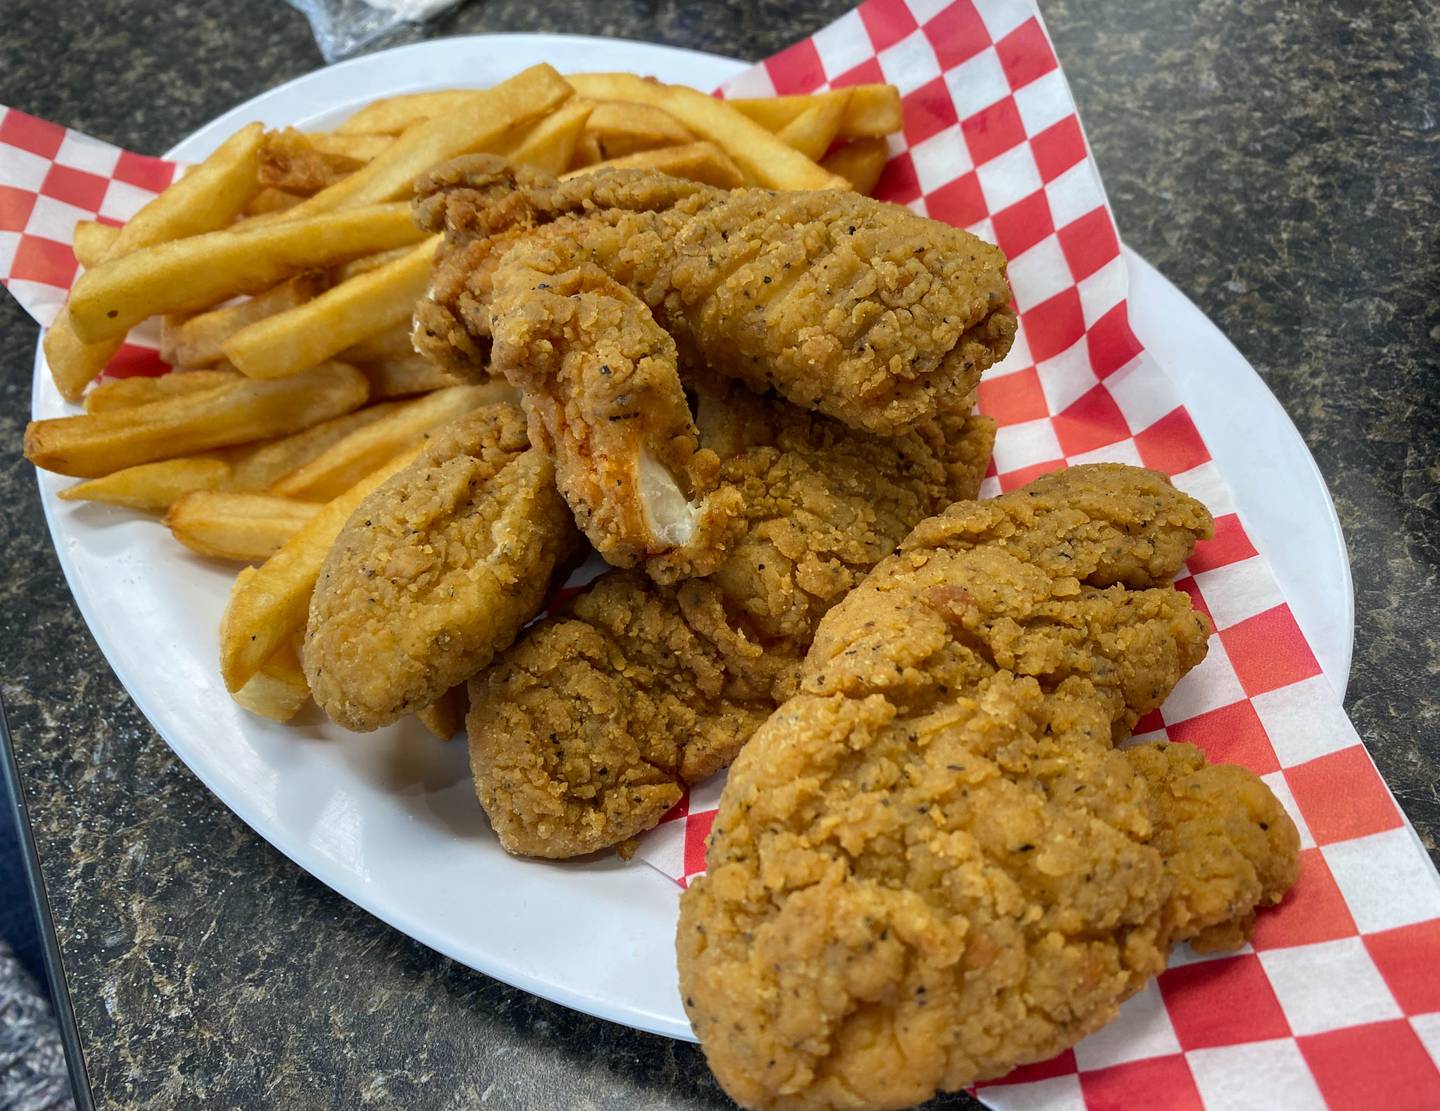 During our visit to Tangie's Kitchen, my fellow diner ordered the chicken tenders with fries.